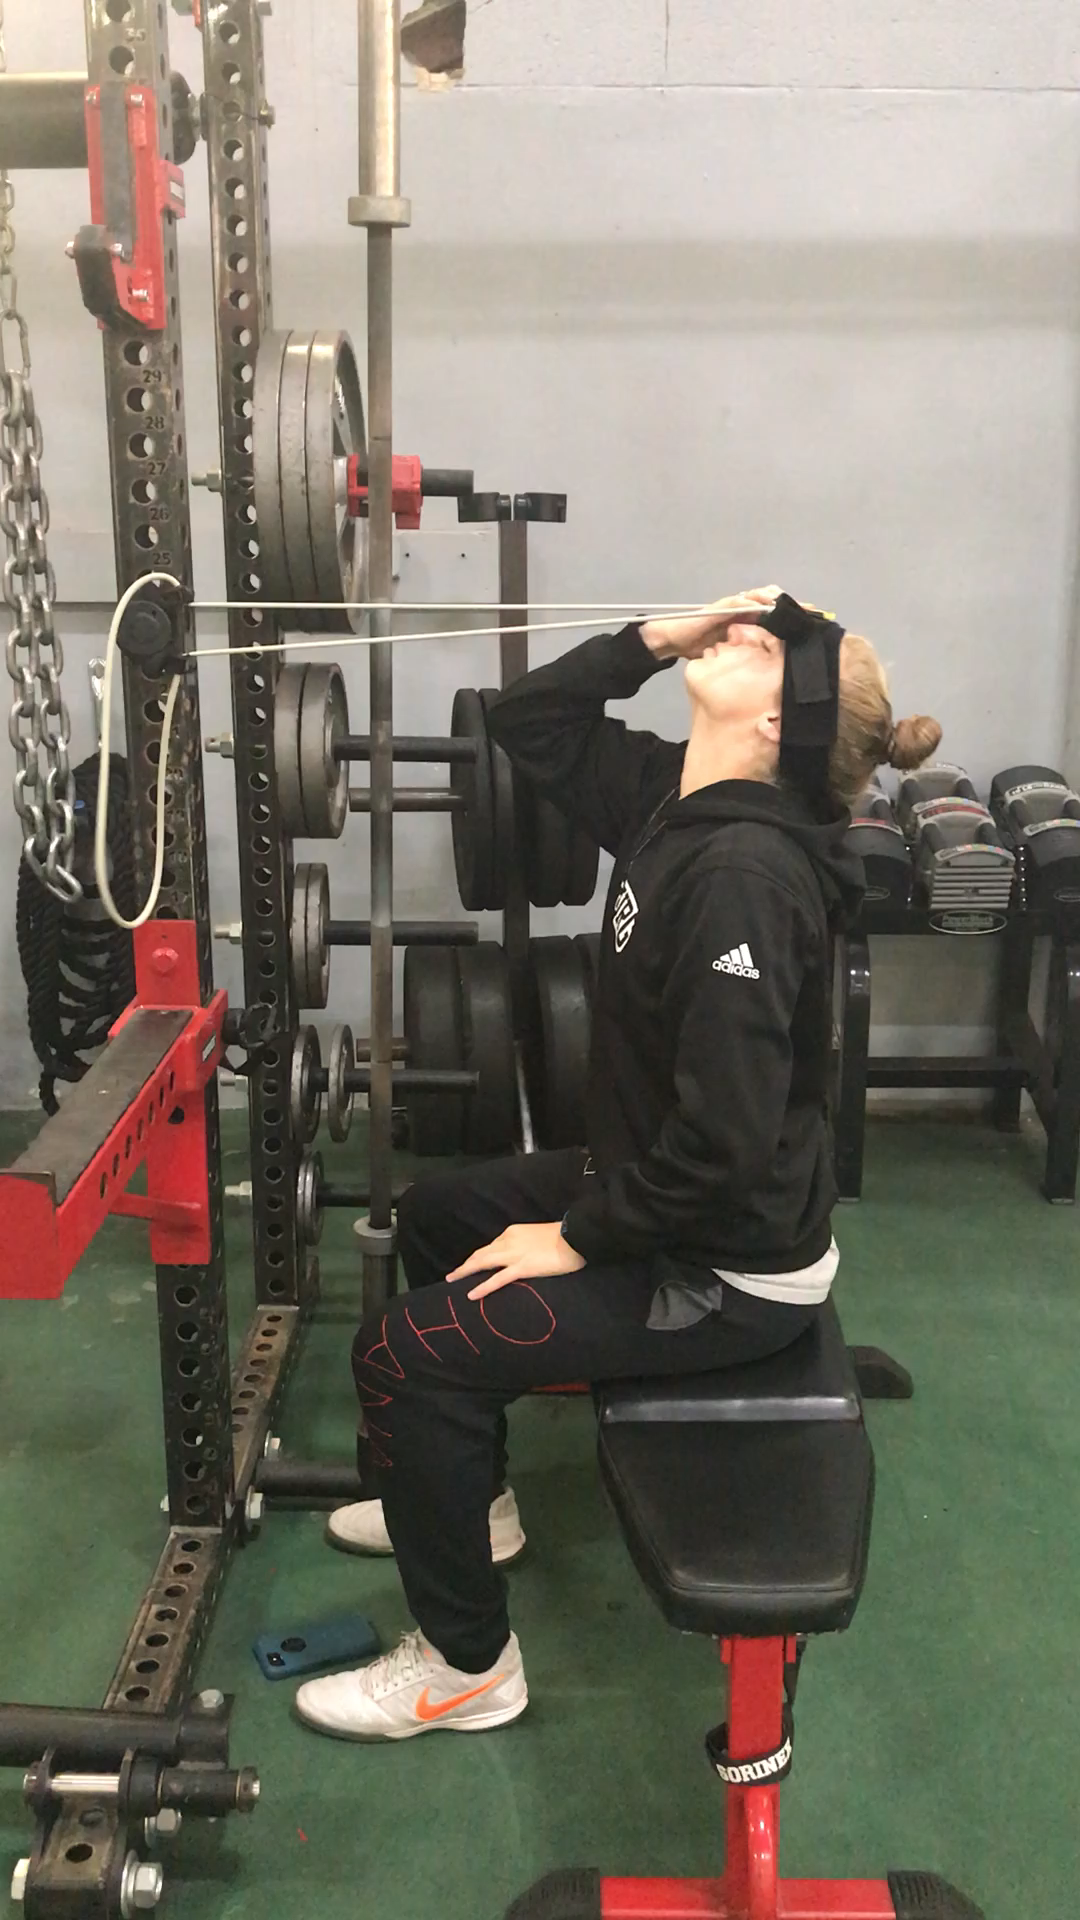 Exploring the Effects of a Neck Strengthening Program on Purposeful Soccer Heading Biomechanics and Neurocognition Published in International Journal of Sports Physical Therapy image pic pic